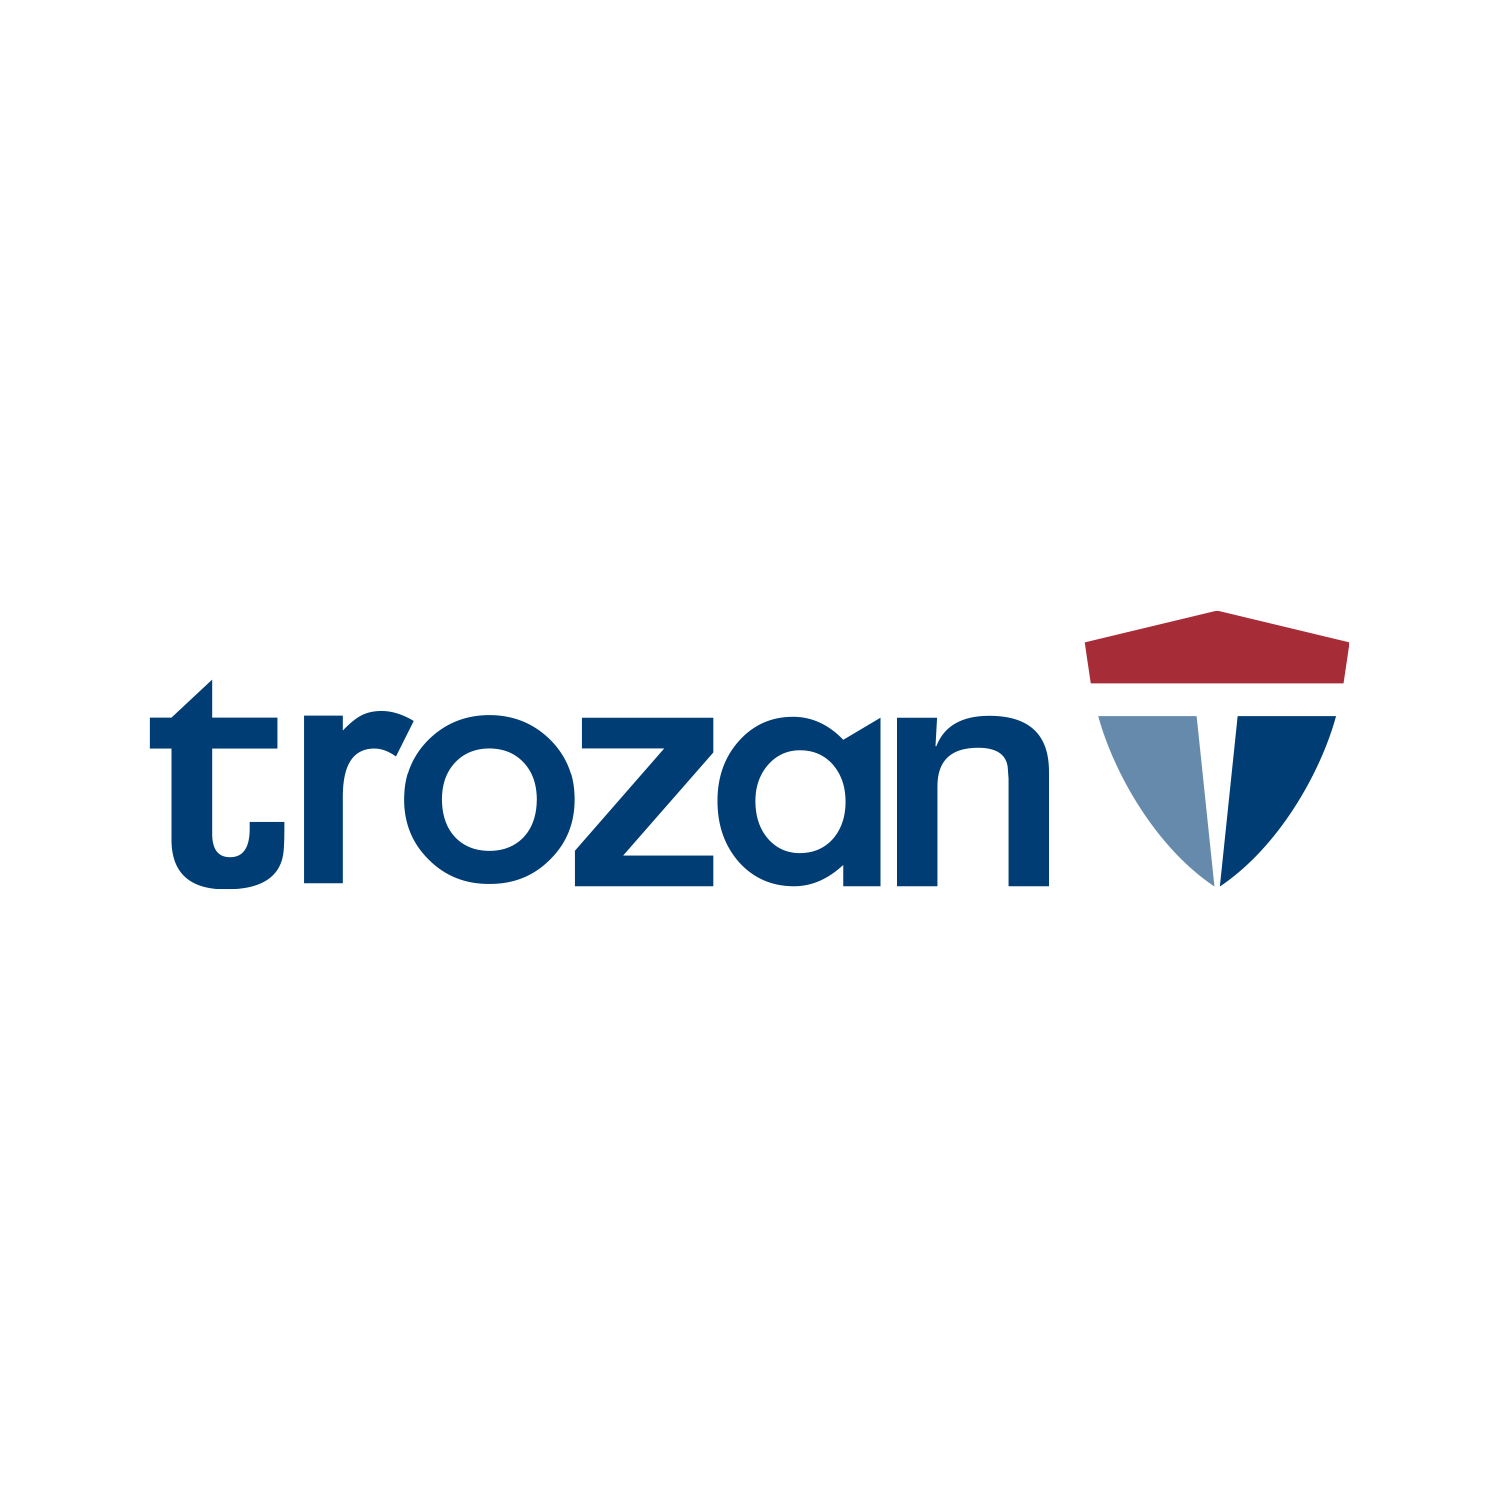 Trozan Insurance Logo Design - Fort Collins, CO Insurance Services Company